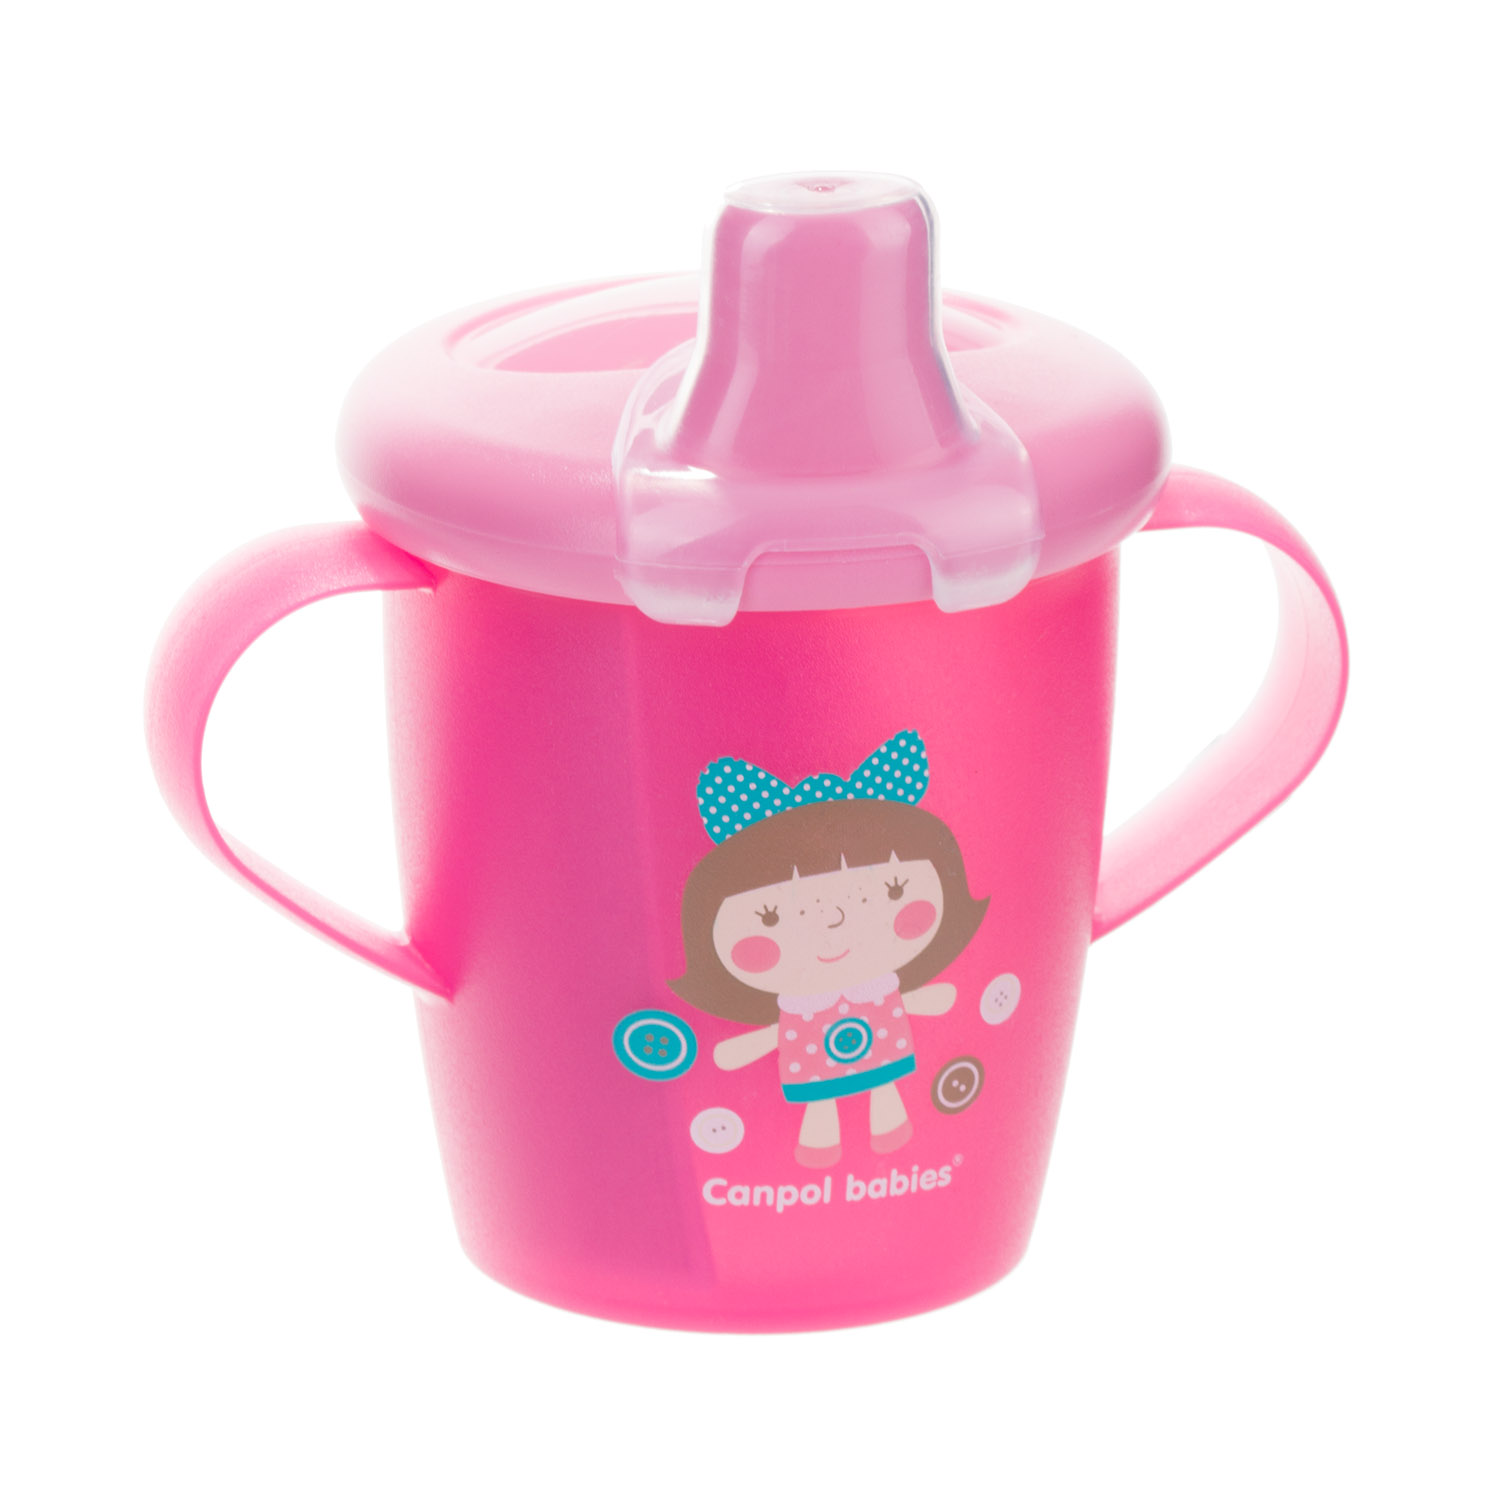 Canpol babies Non-spill Cup Firm 250ml TOYS pink